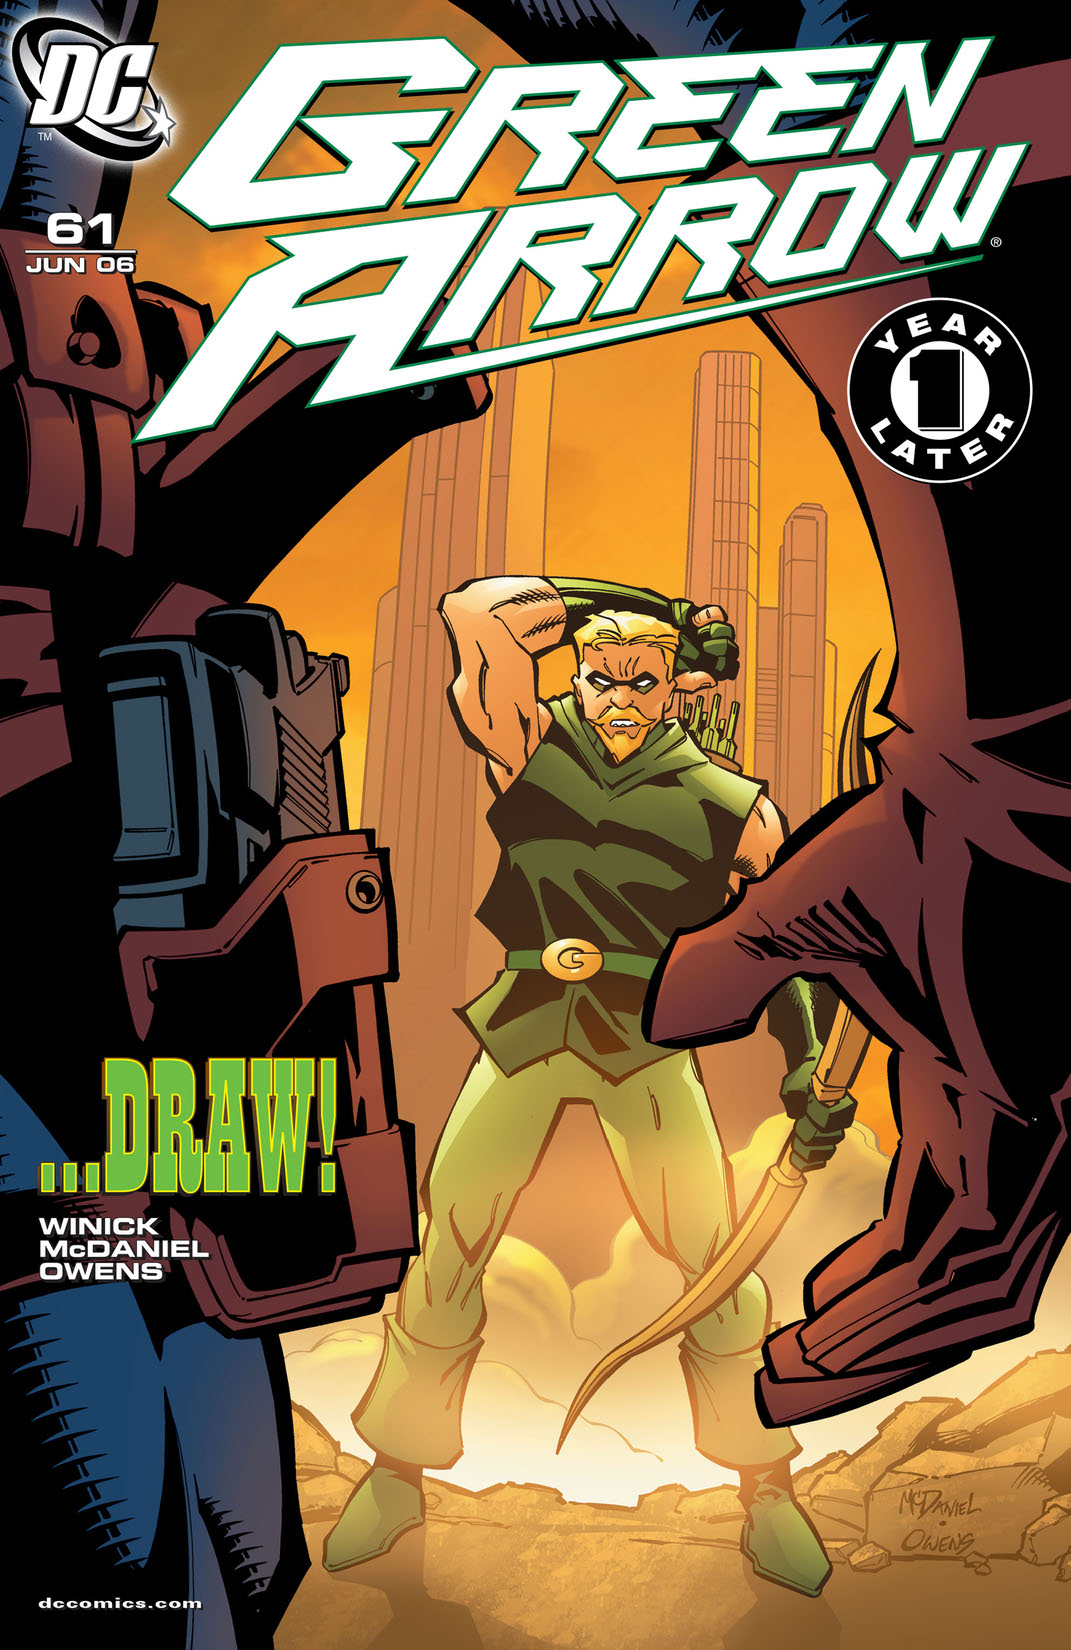 Green Arrow (2001-) #61 preview images